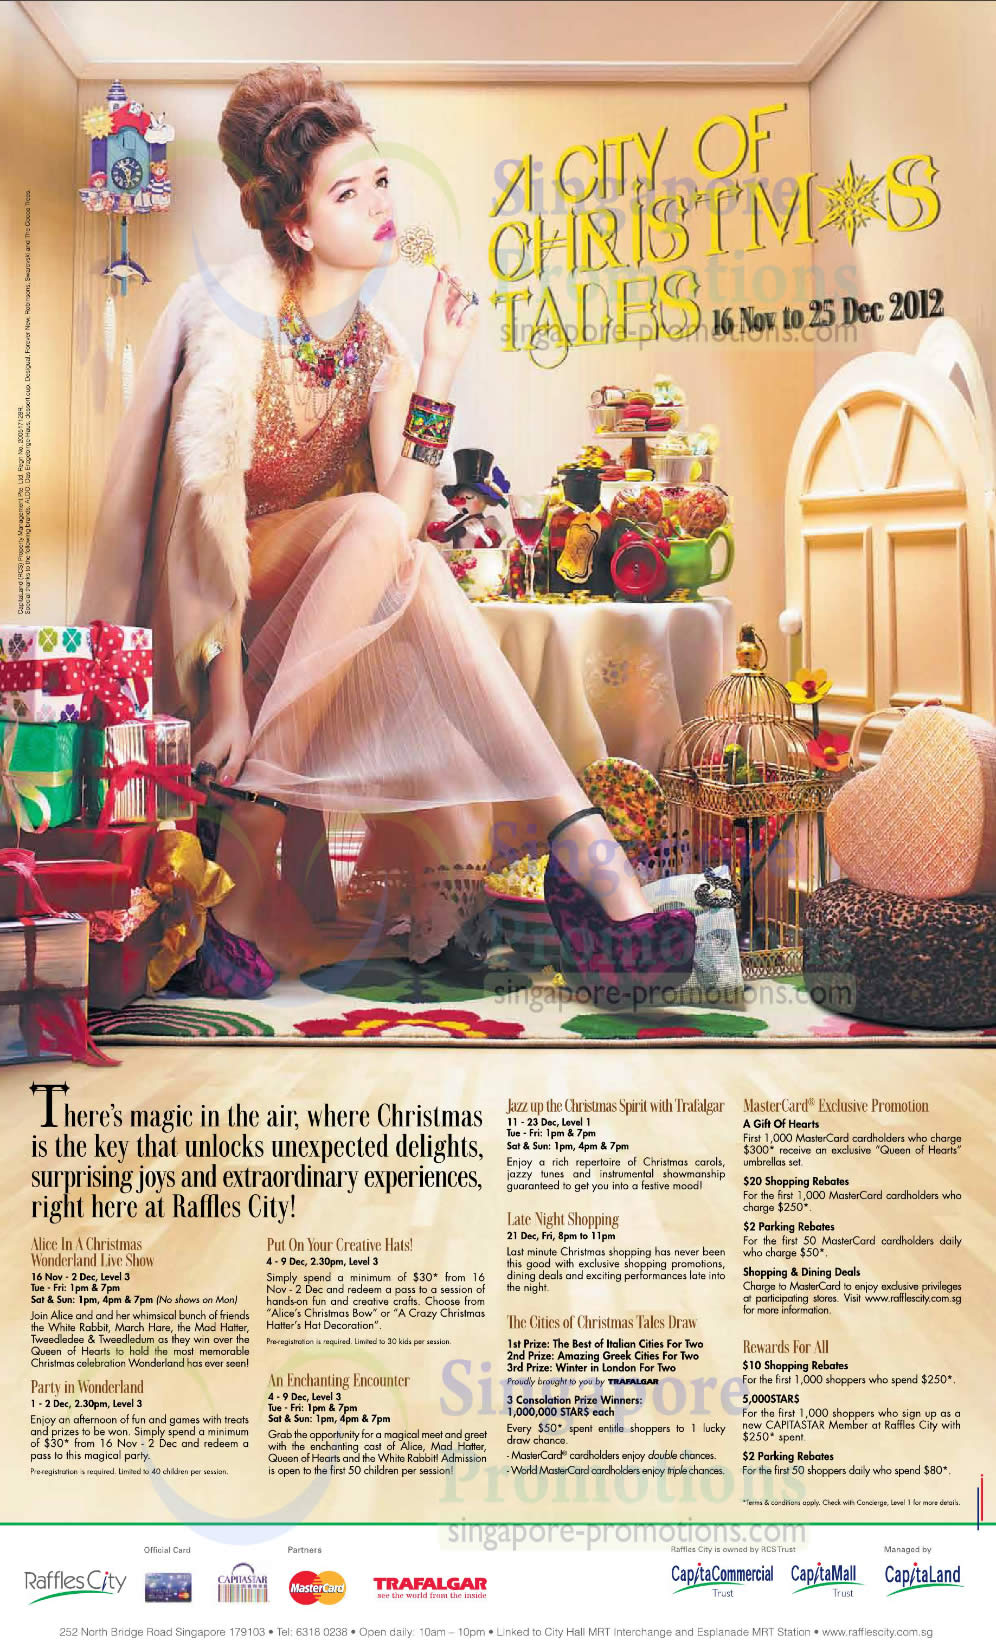 Featured image for Raffles City Christmas Promotions & Activities 16 Nov - 25 Dec 2012